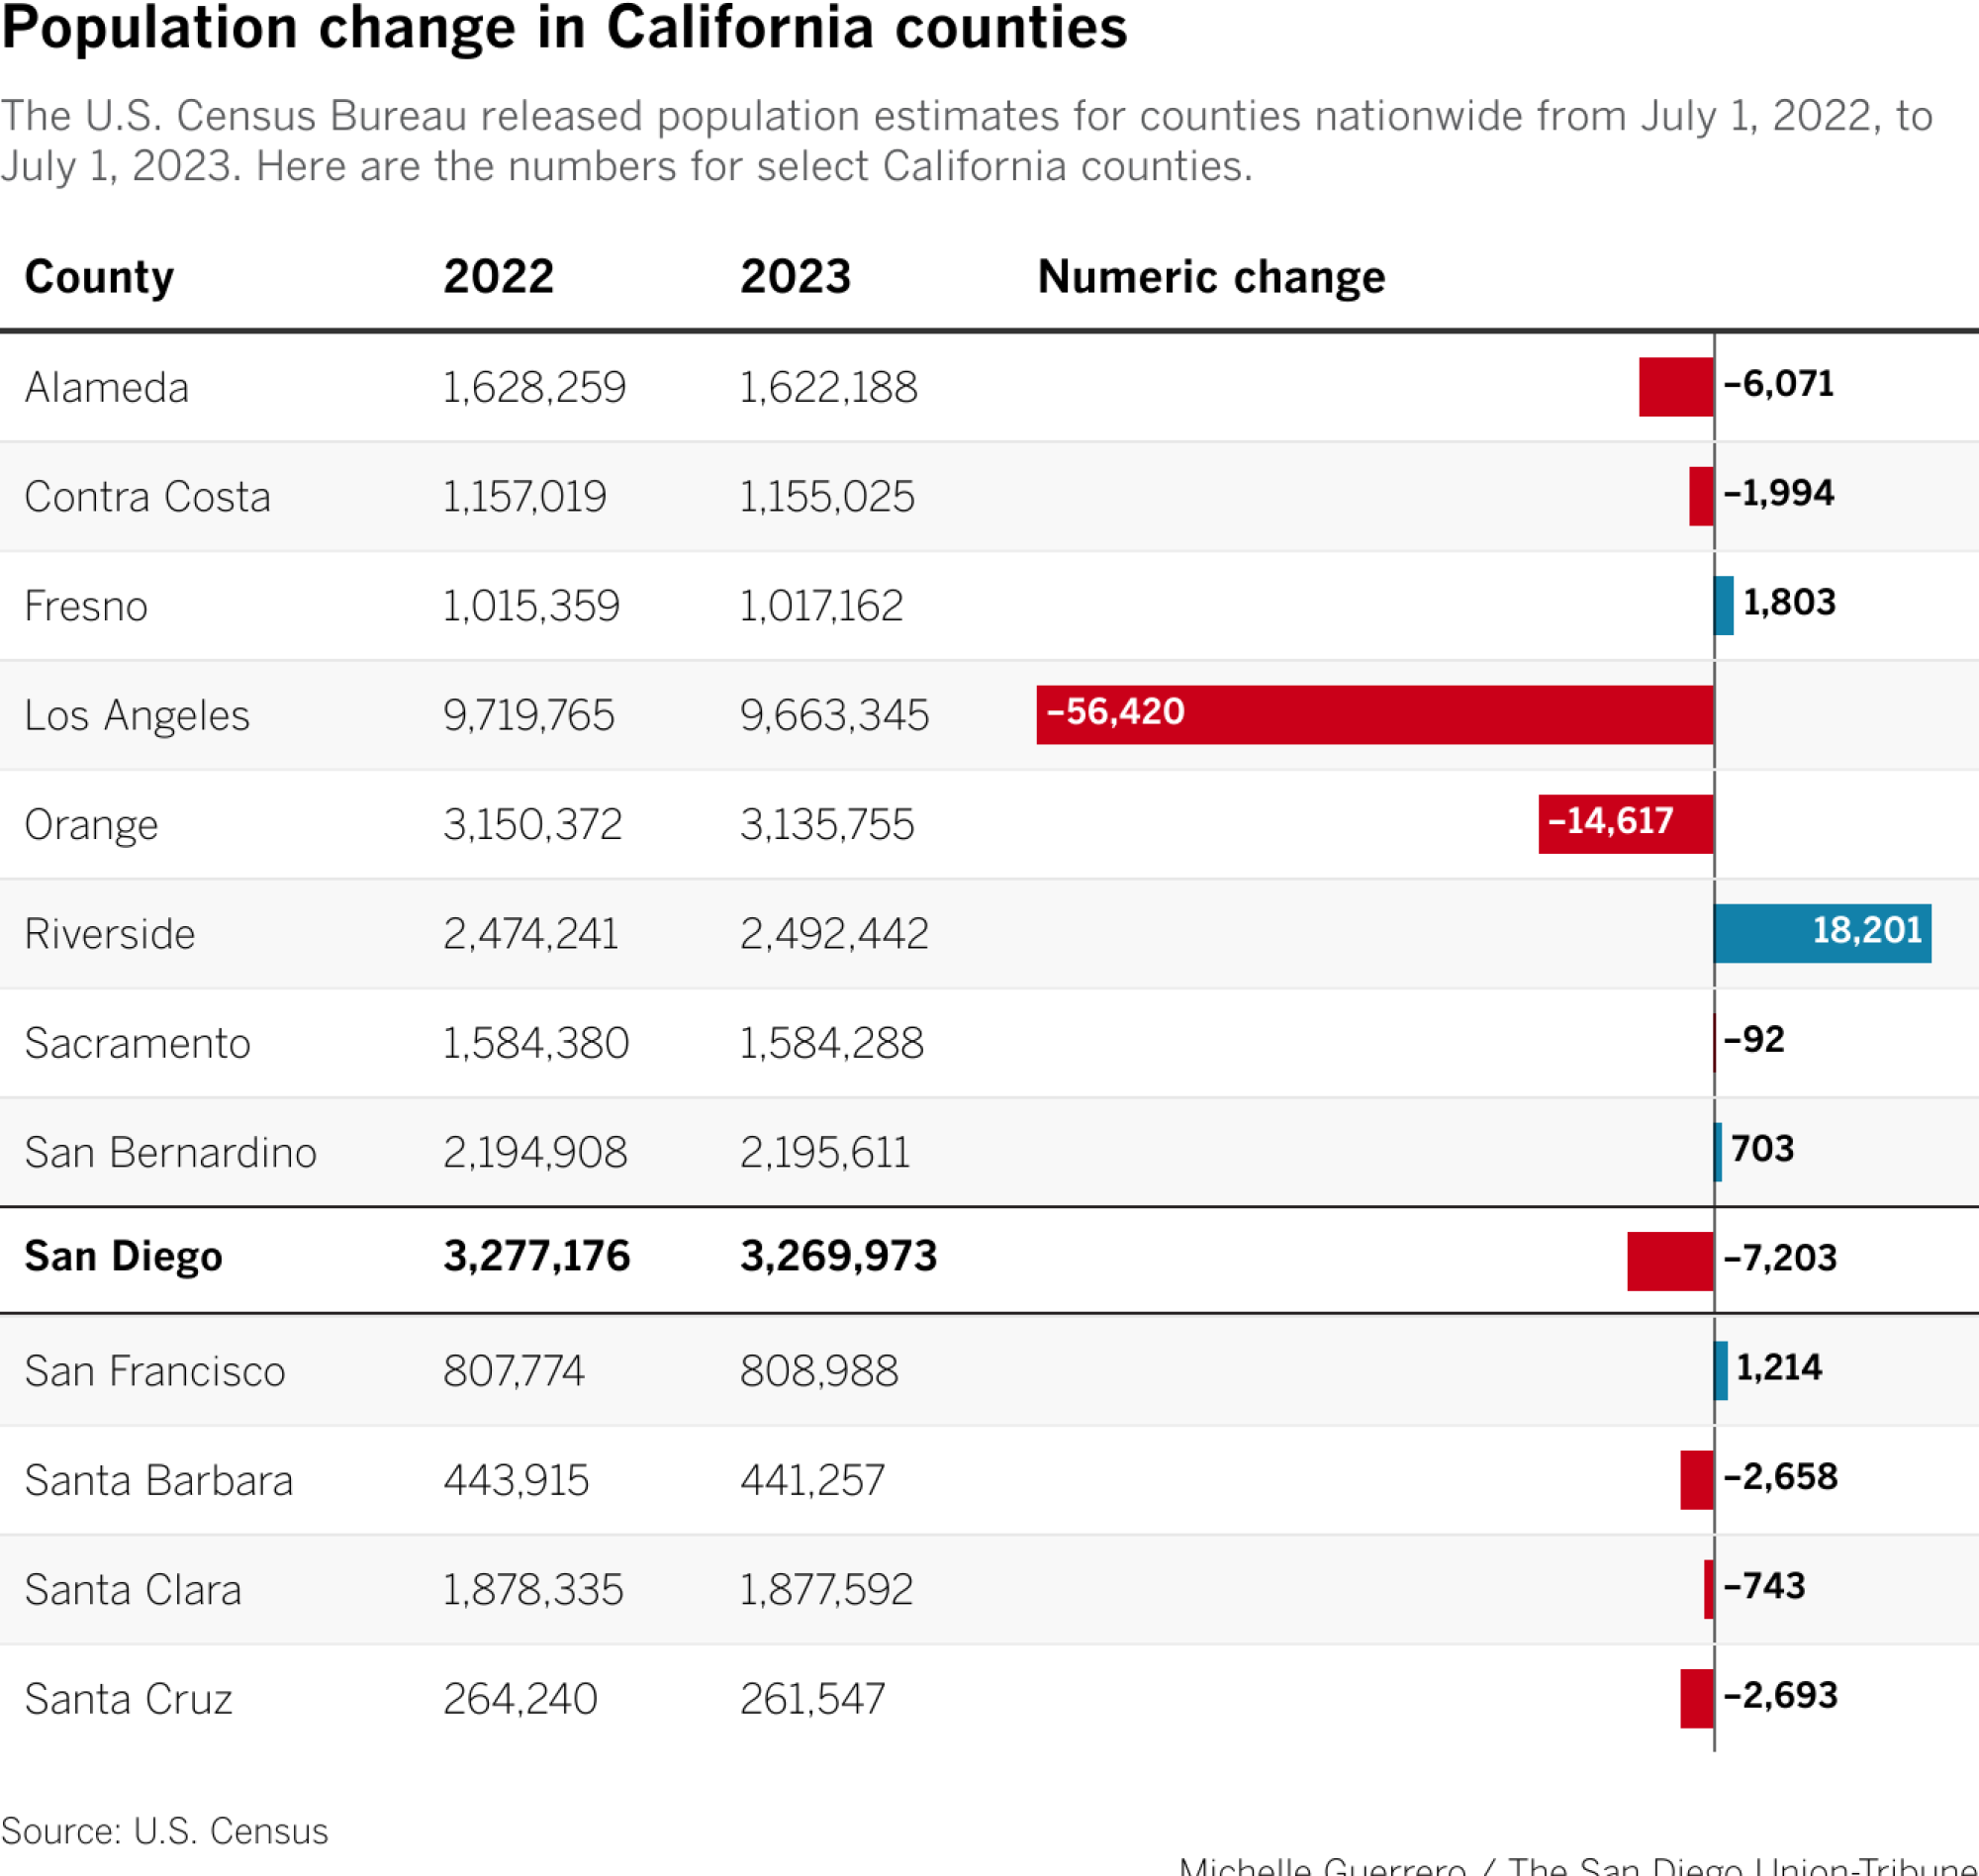 The U.S. Census Bureau released population estimates for counties nationwide from July 1, 2022, to July 1, 2023. Here are the numbers for select California counties.